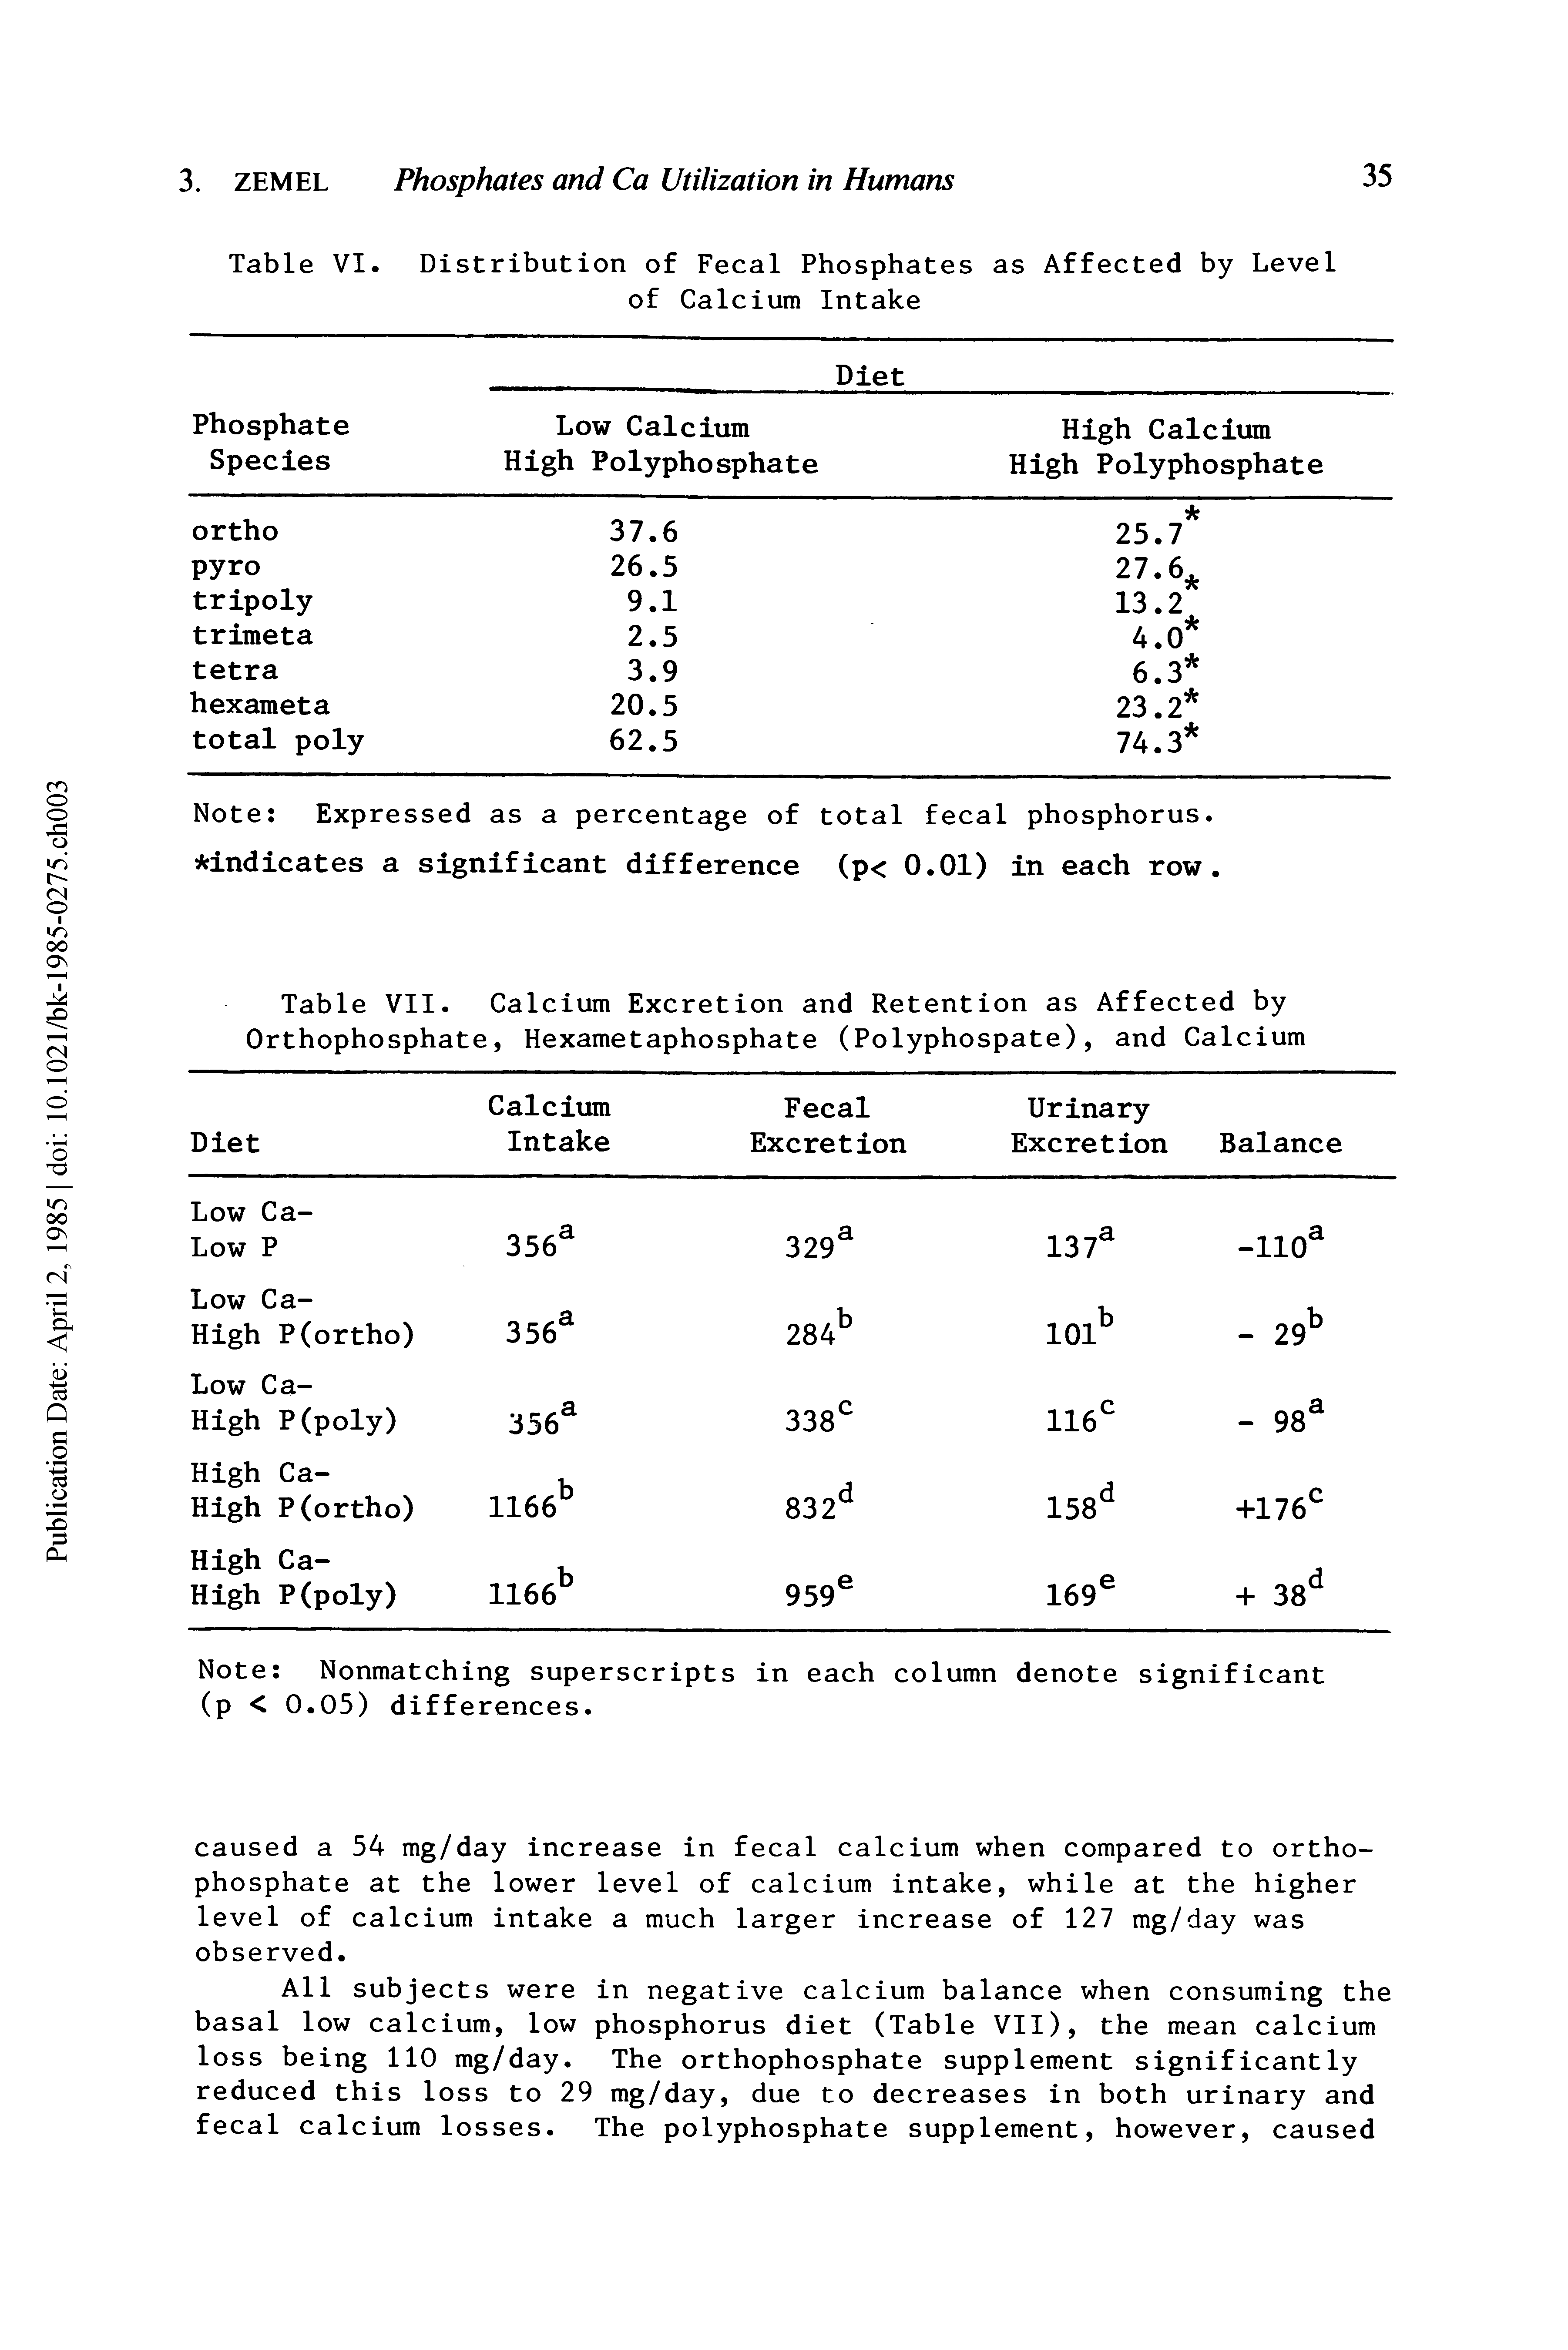 Table VII. Calcium Excretion and Retention as Affected by Orthophosphate, Hexametaphosphate (Polyphospate), and Calcium...